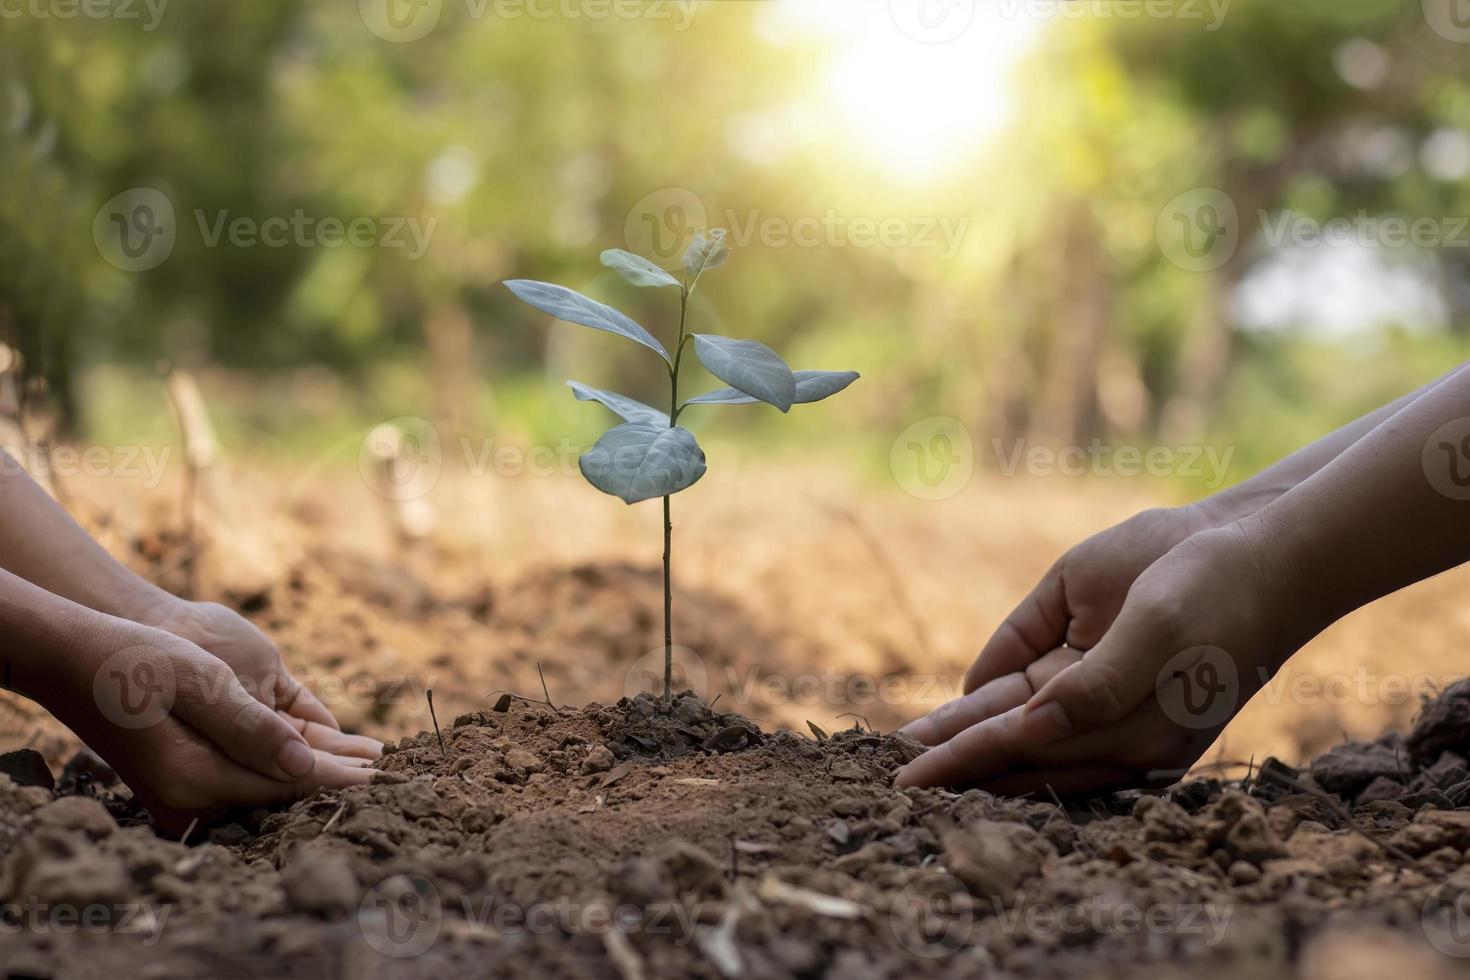 Children and adults work together to plant small trees in the garden, planting ideas to reduce air pollution or PM2.5 and reduce global warming. photo